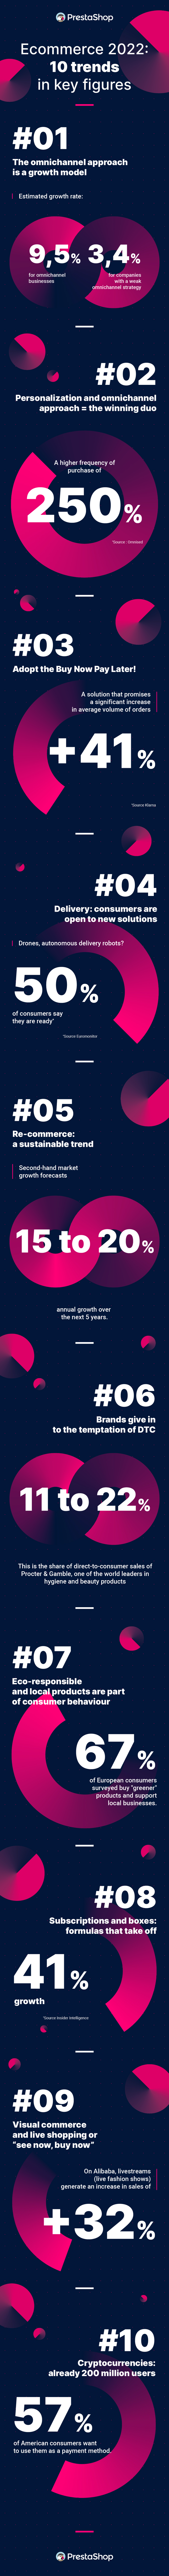 Infographic Ecommerce Trrends 2022